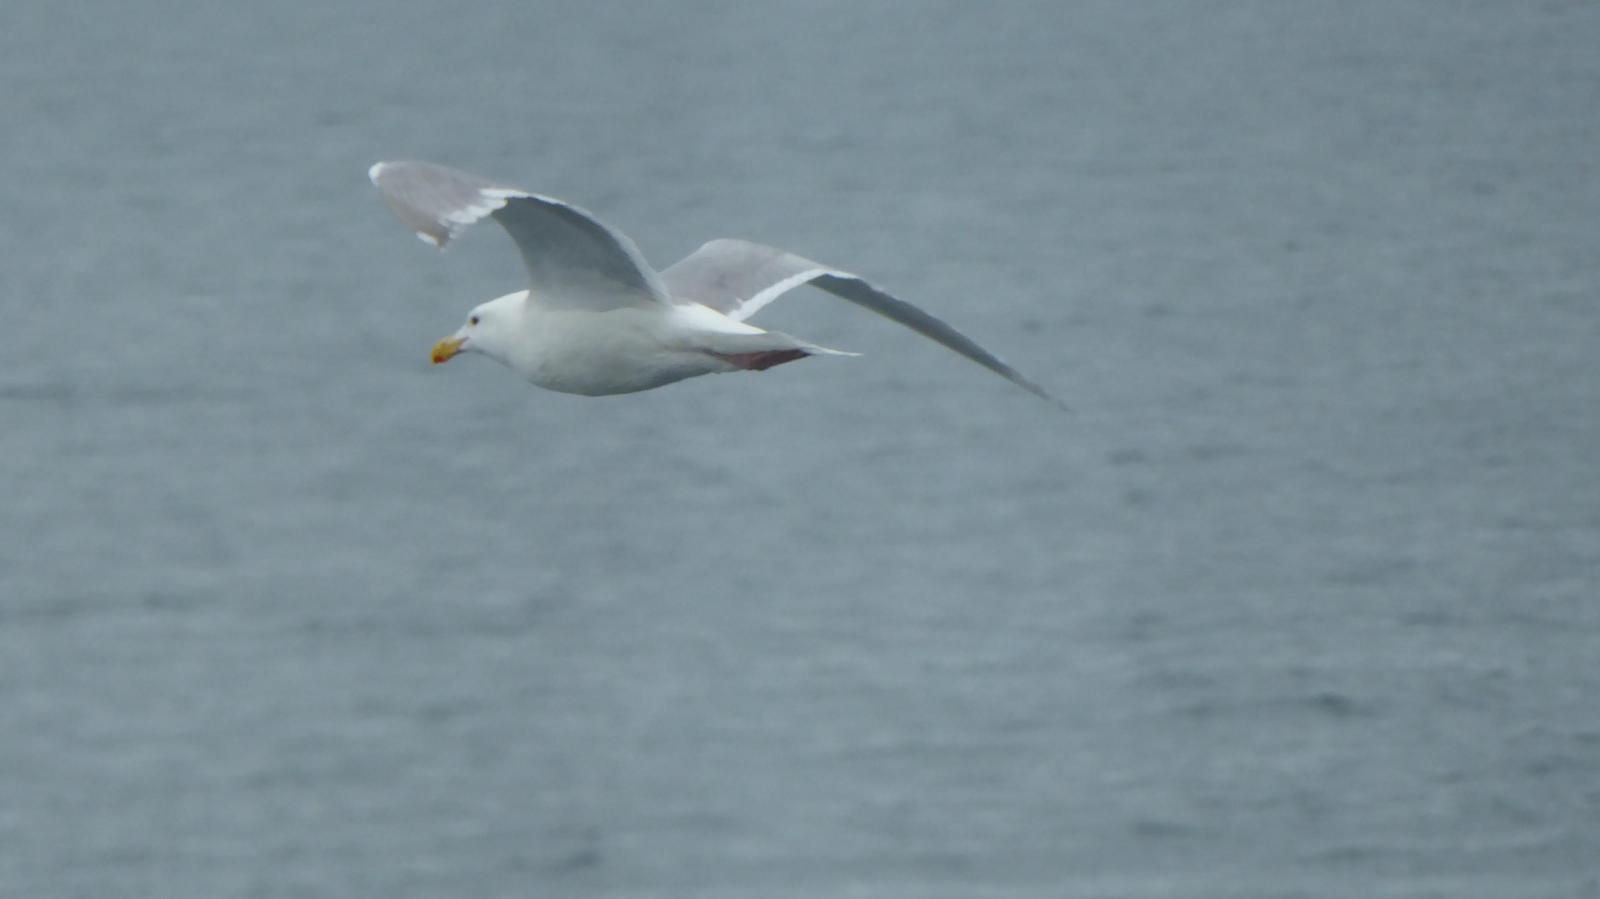 Glaucous-winged Gull Photo by Daliel Leite